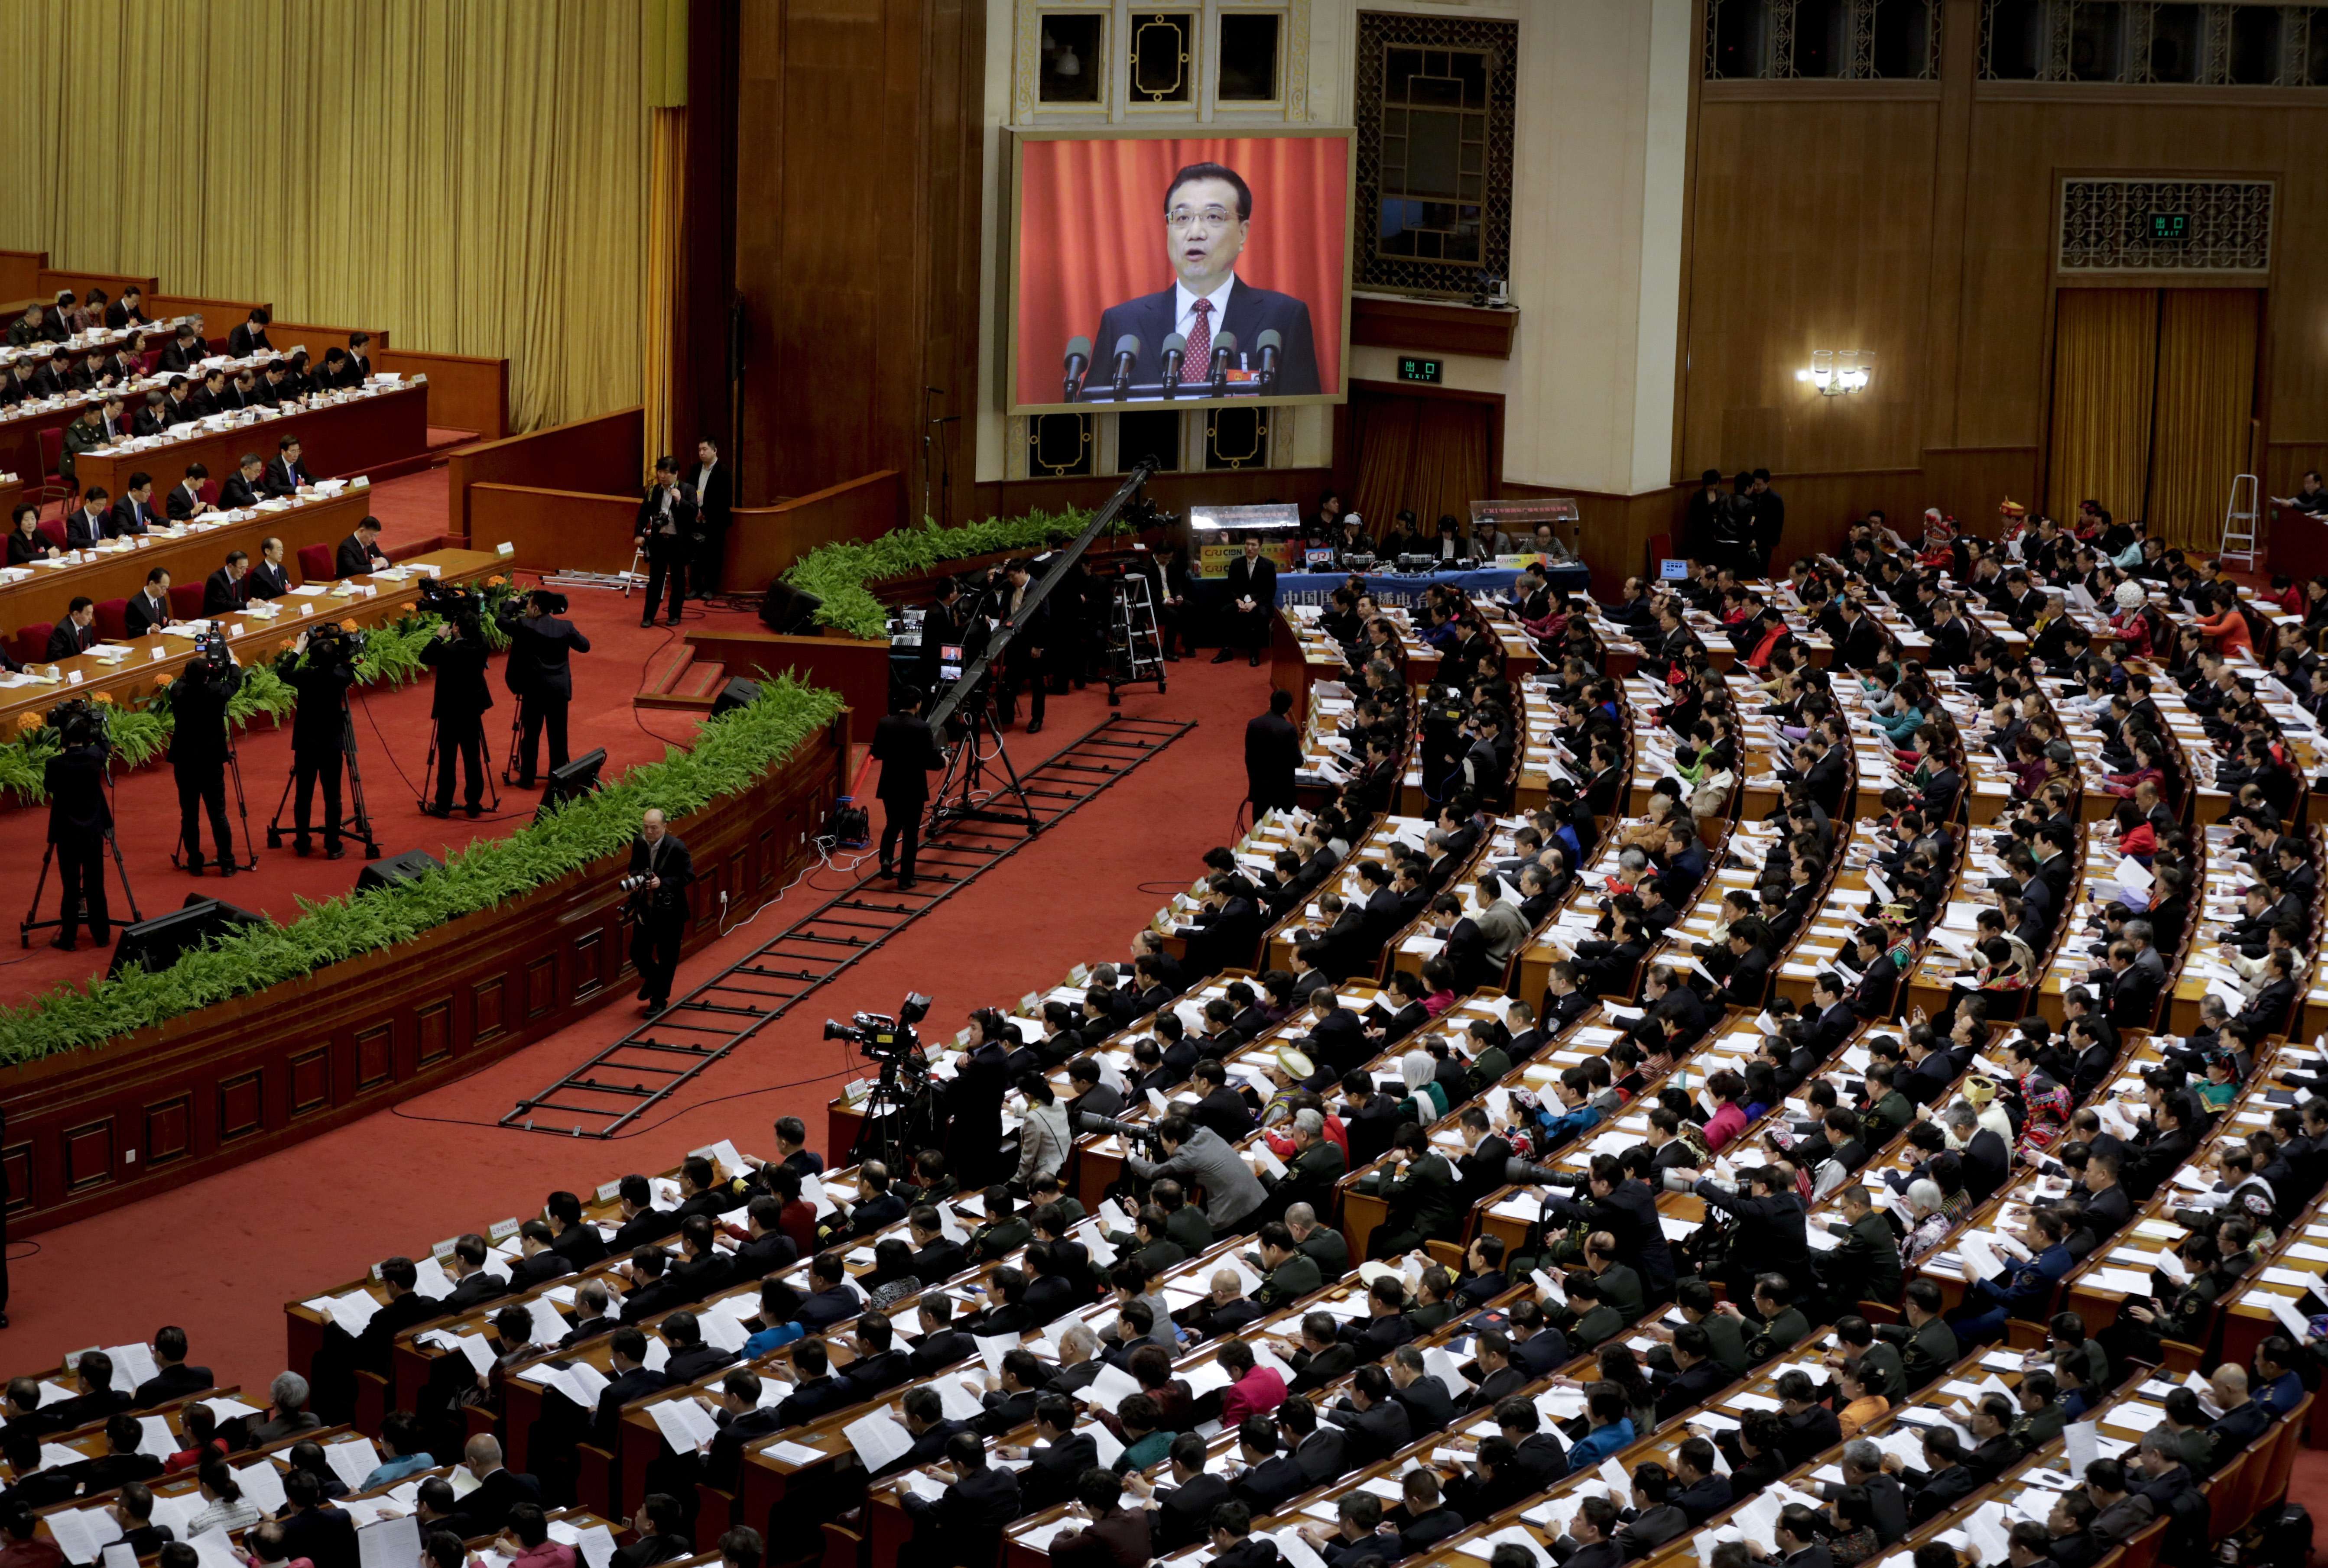 Chinese Premier Li Keqiang delivers his work report last year via video screen to the National People's Congress in Beijing. Photo: AP